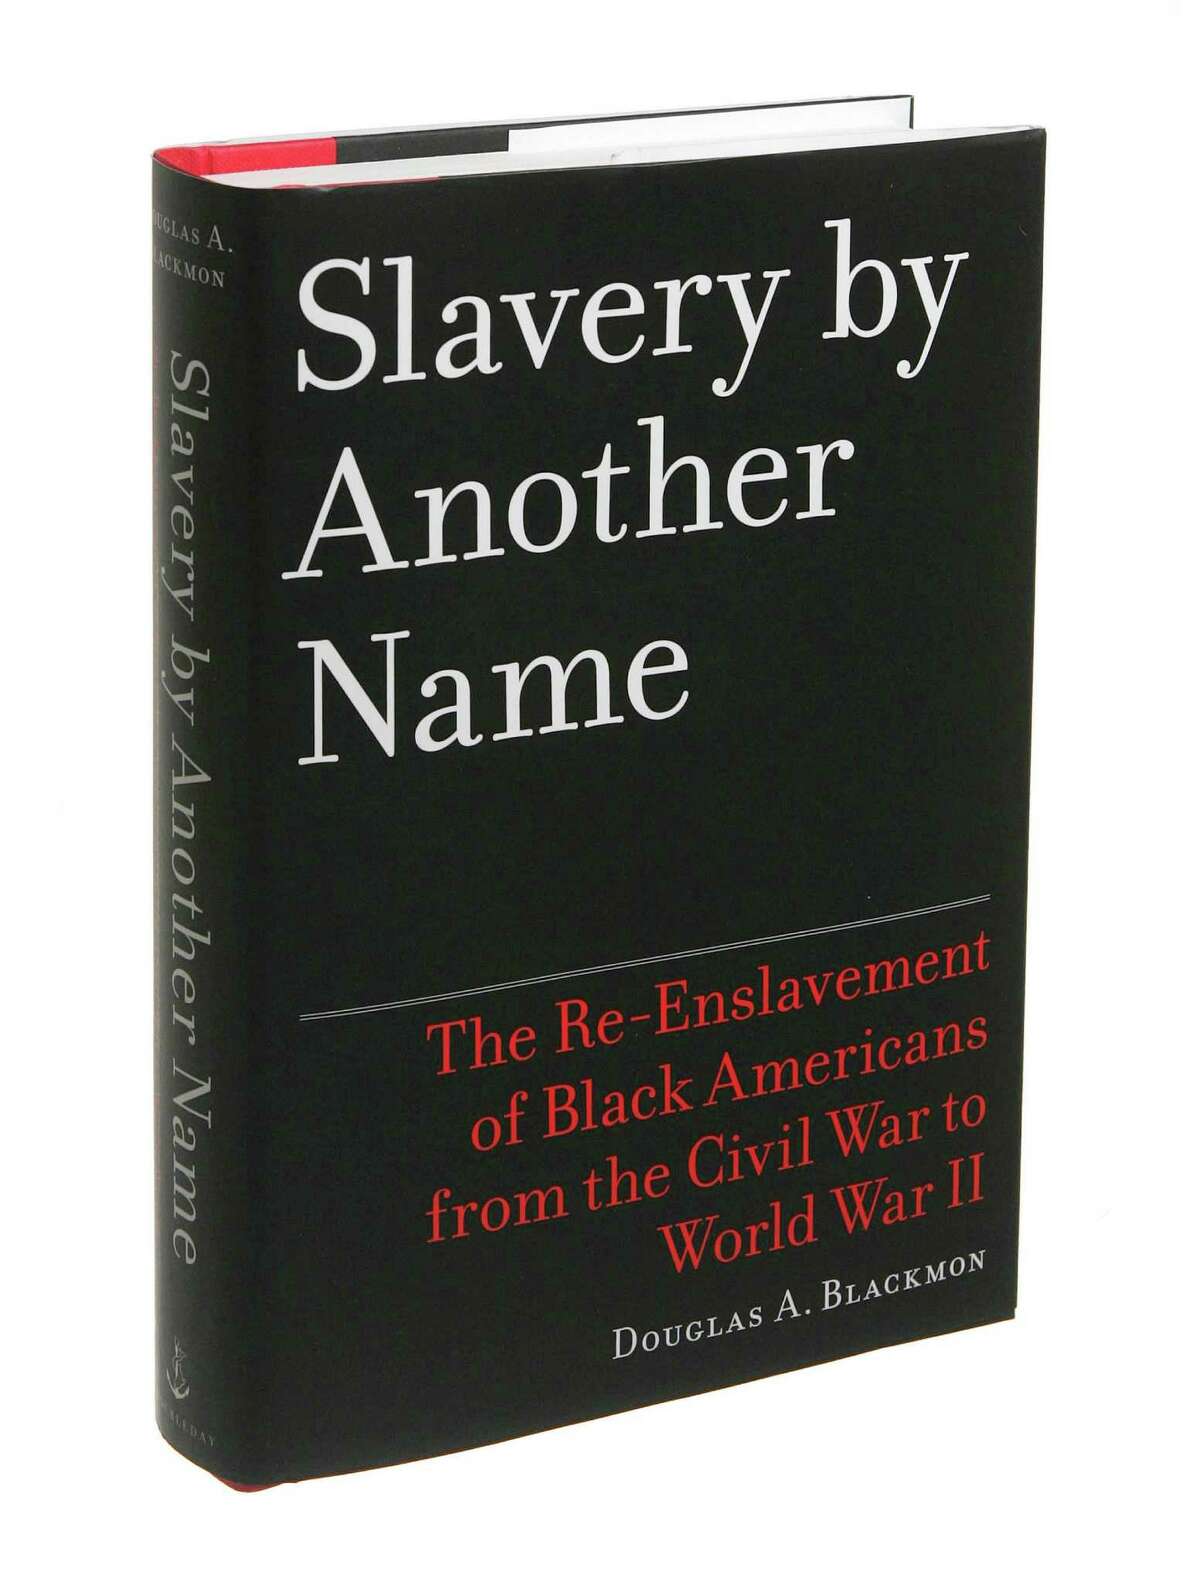 FILE-- The cover of the book "Slavery by Another Name: The Re-Enslavement of Black Americans from the Civil War to World War II," written by Douglas A. Blackmon, in New York, April 9, 2008. Inmate Mark Melvin has filed a suit against prison officials and the state commissioner of corrections in Alabama that says he was told that a Pulitzer Prize winning book about convict leasing at the turn of the century was "too incendiary" and "too provocative," to be read by inmates. (William P. O'Donnell/The New York Times)